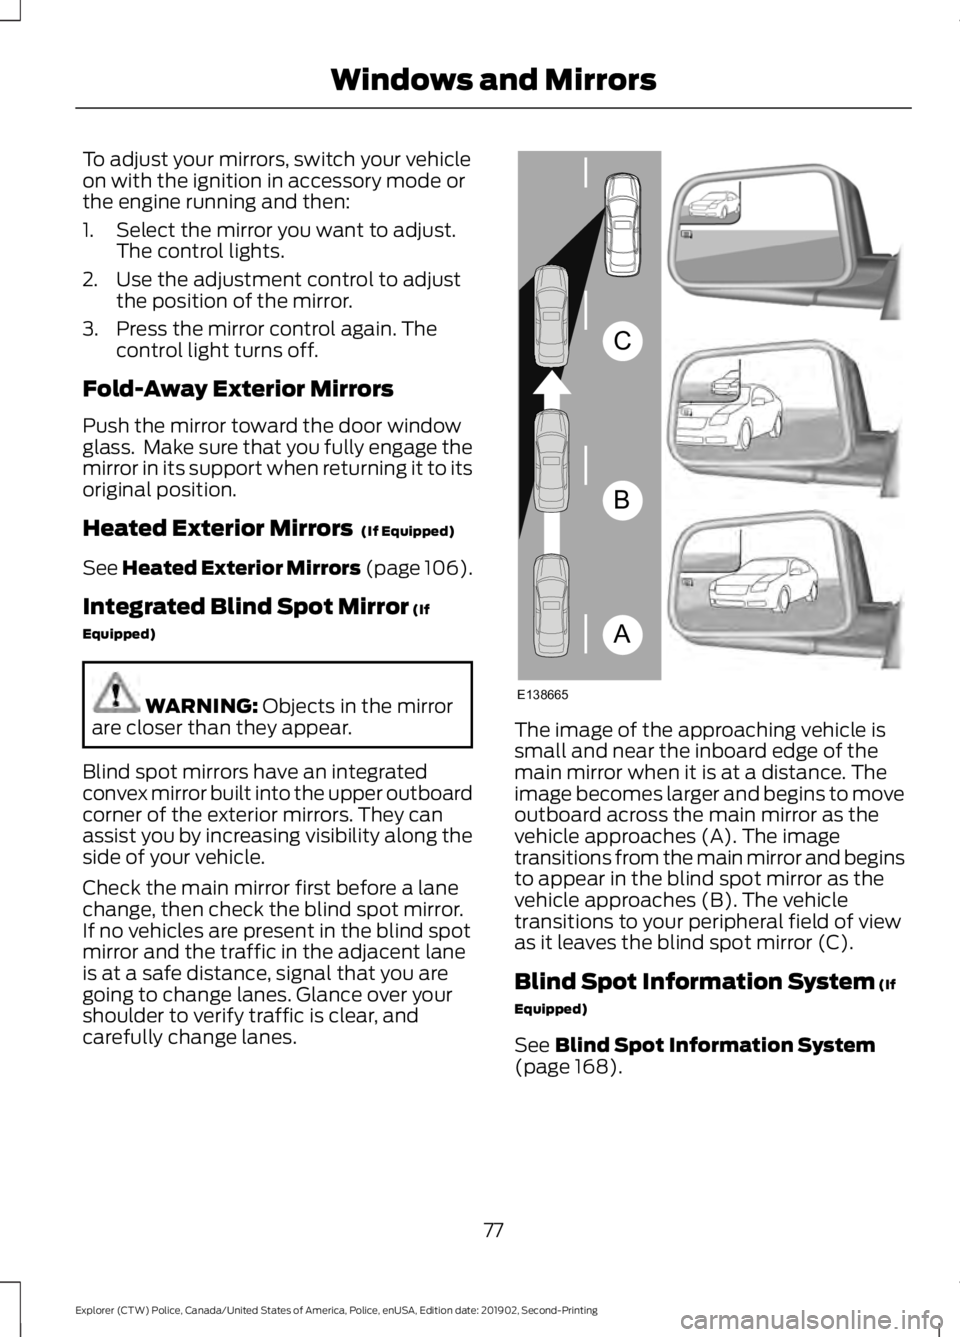 FORD POLICE INTERCEPTOR 2020  Owners Manual To adjust your mirrors, switch your vehicle
on with the ignition in accessory mode or
the engine running and then:
1. Select the mirror you want to adjust.
The control lights.
2. Use the adjustment co